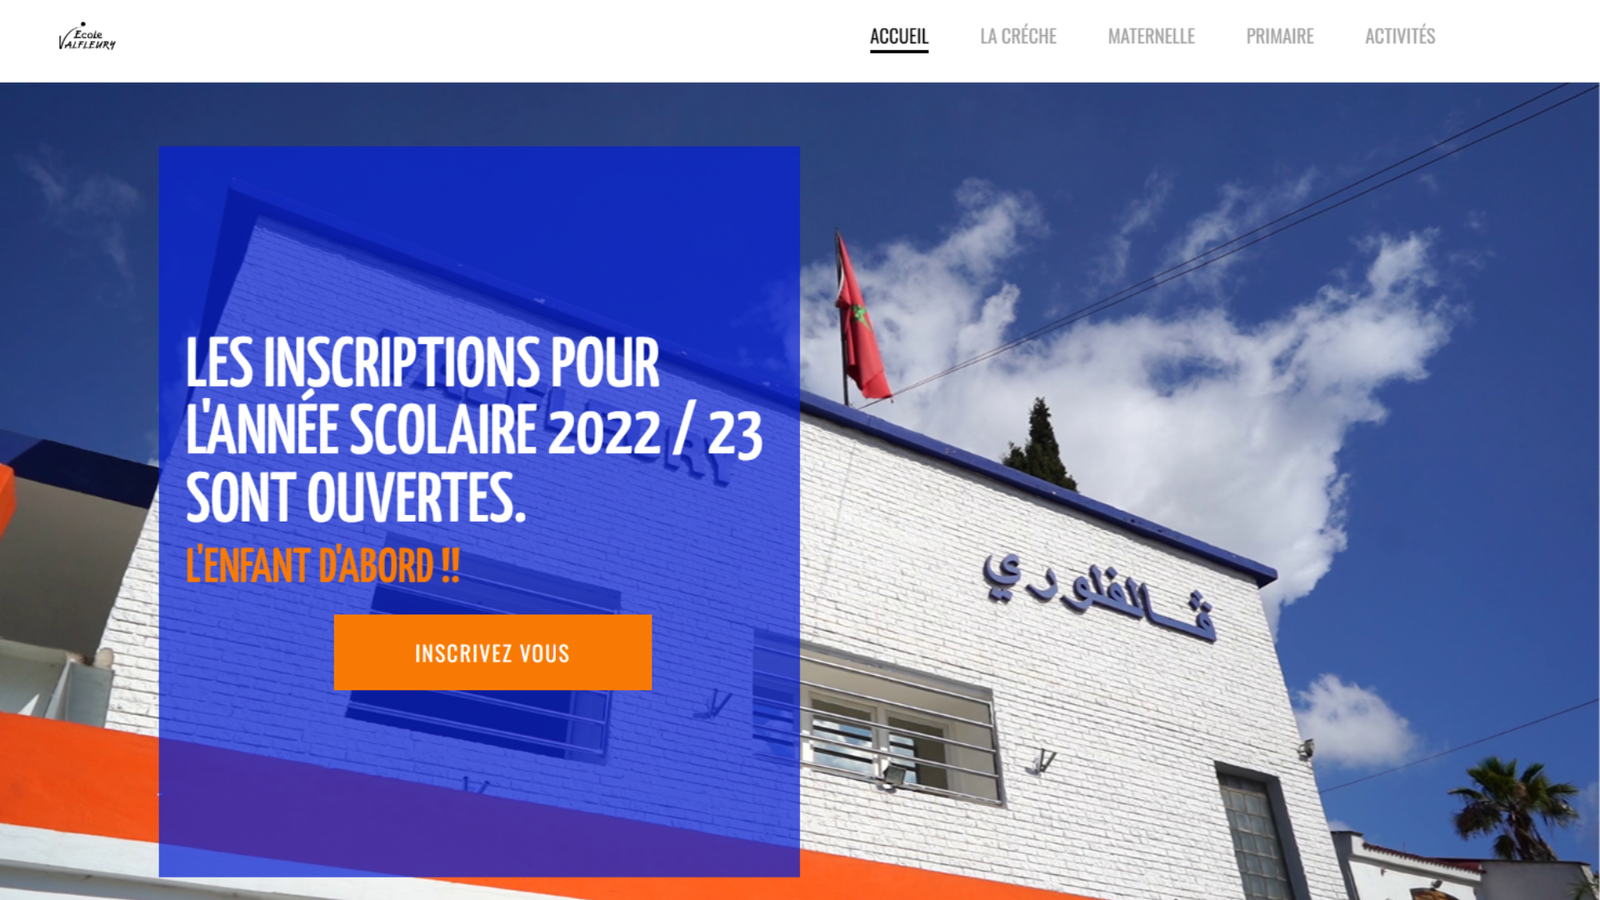 ecole agence marketing media video publictaire site web